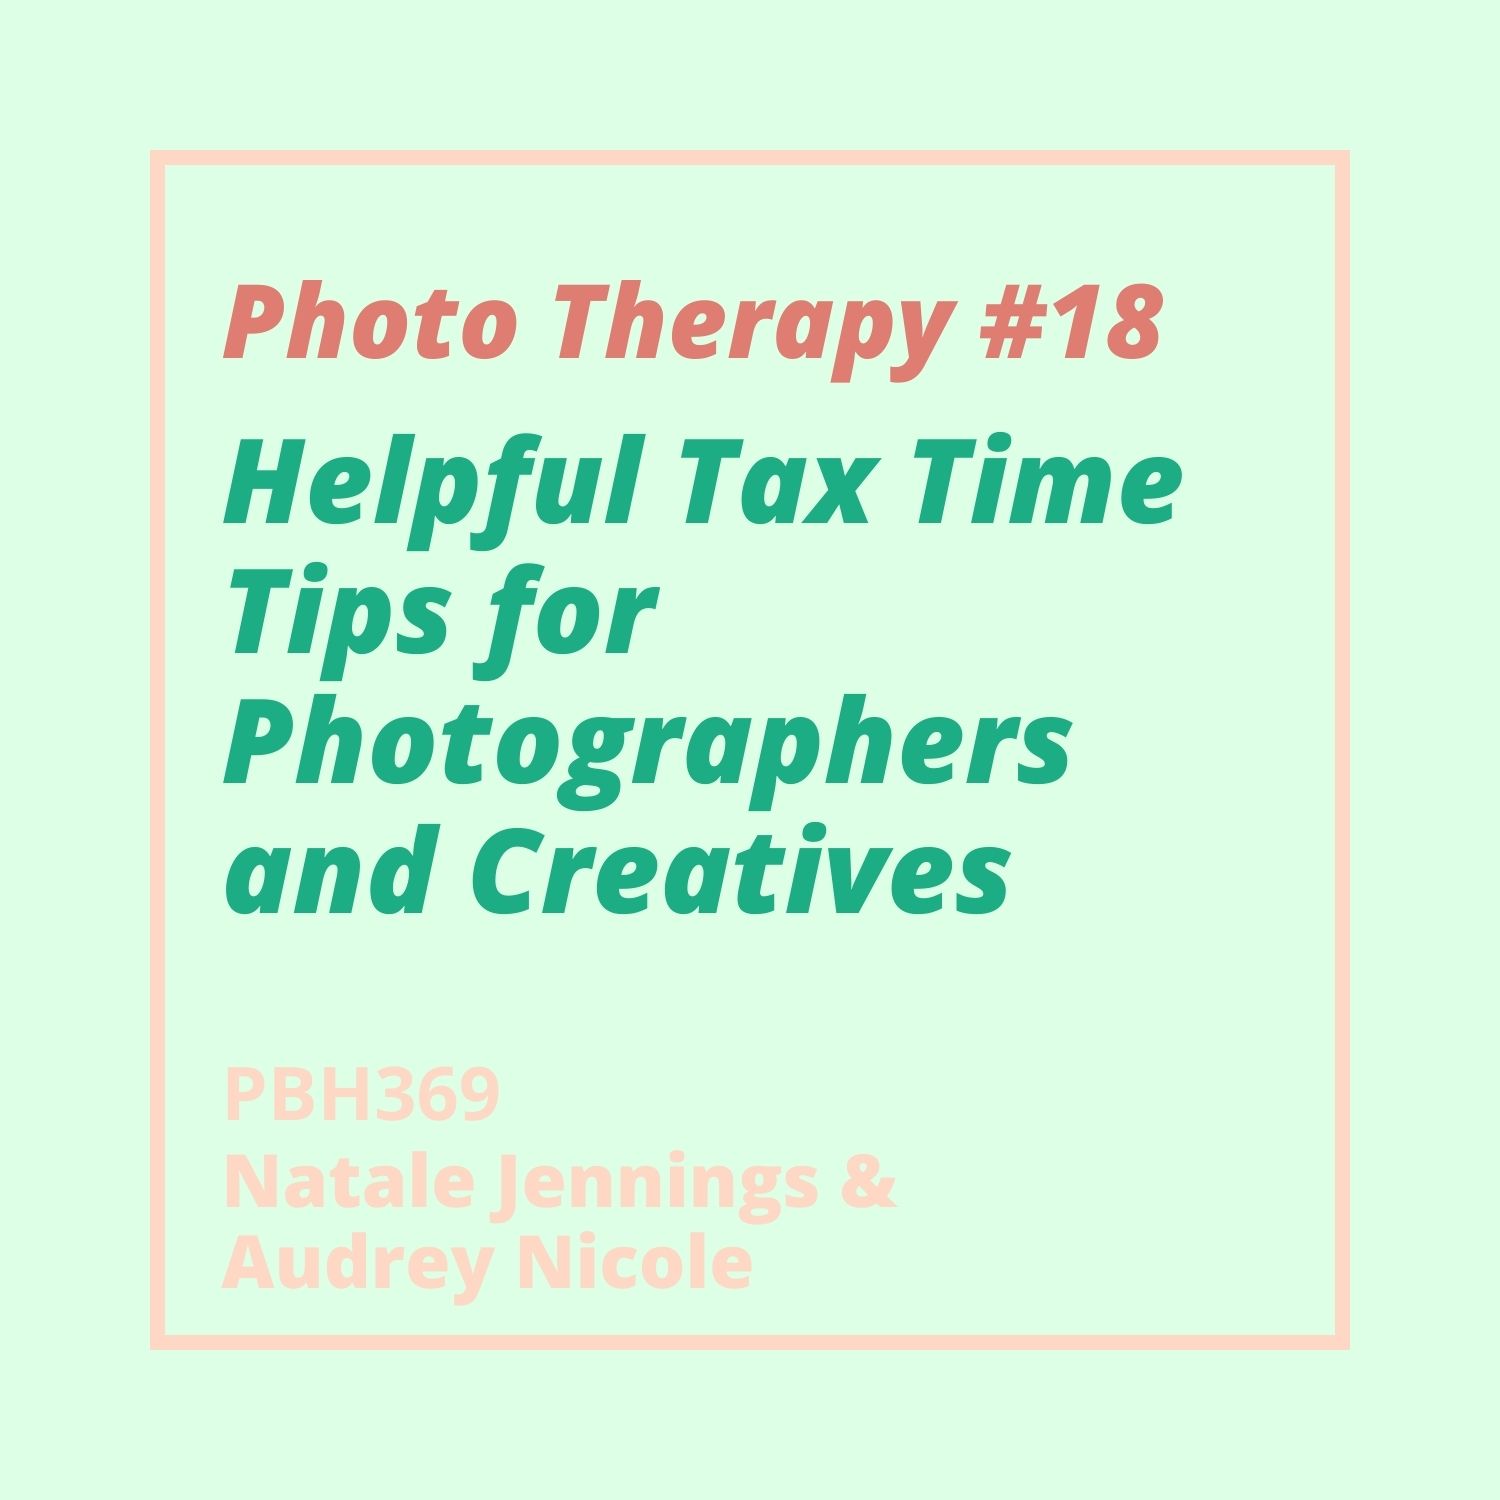 369 Photo Therapy #18 - Helpful Tax Time Tips for Photographers and Creatives